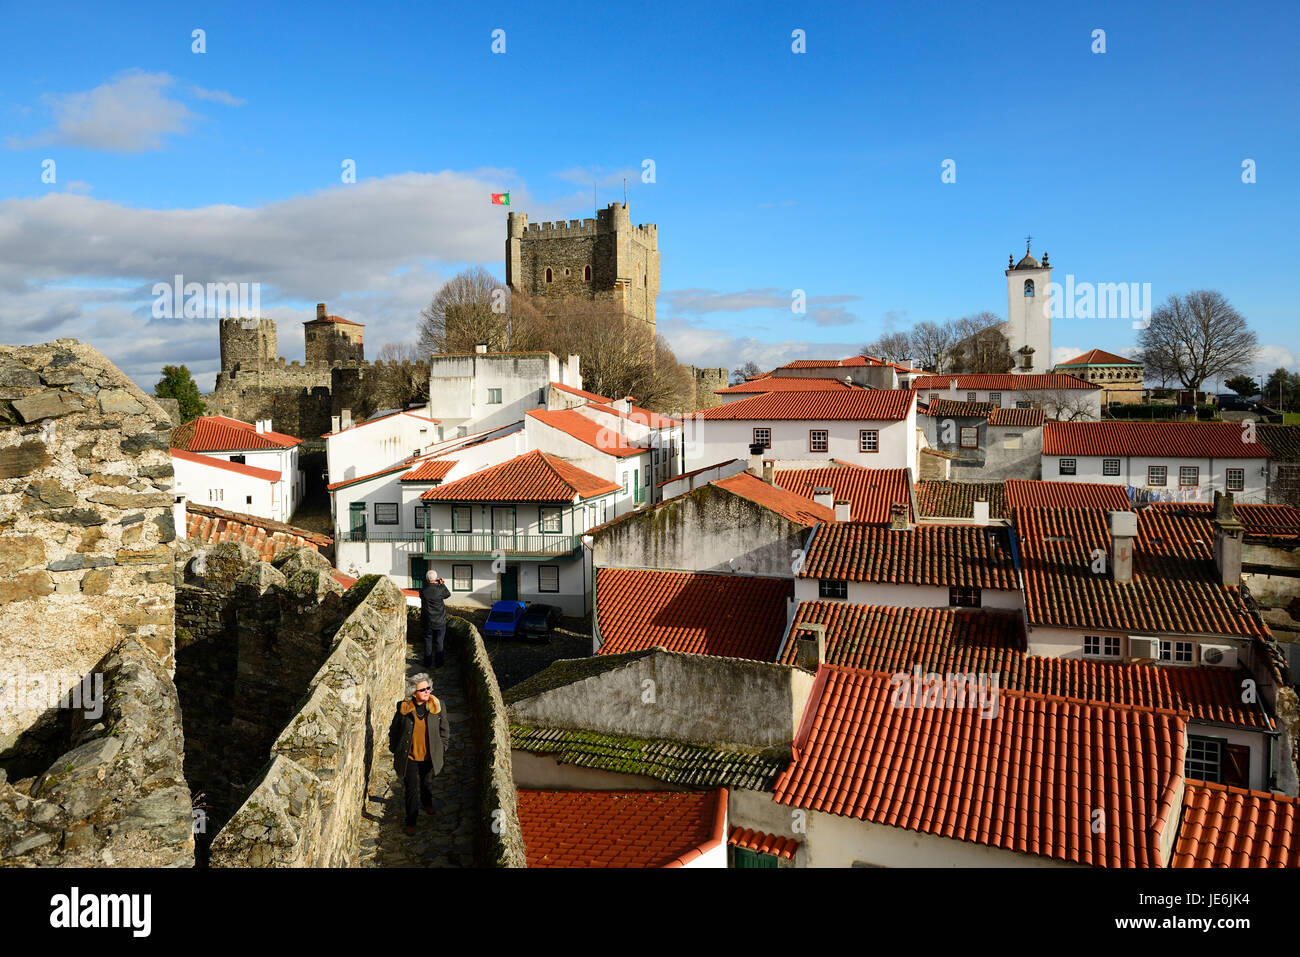 The castle and the medieval citadel of Braganca, one of the oldest cities in Portugal, Tras-os-Montes. Stock Photo